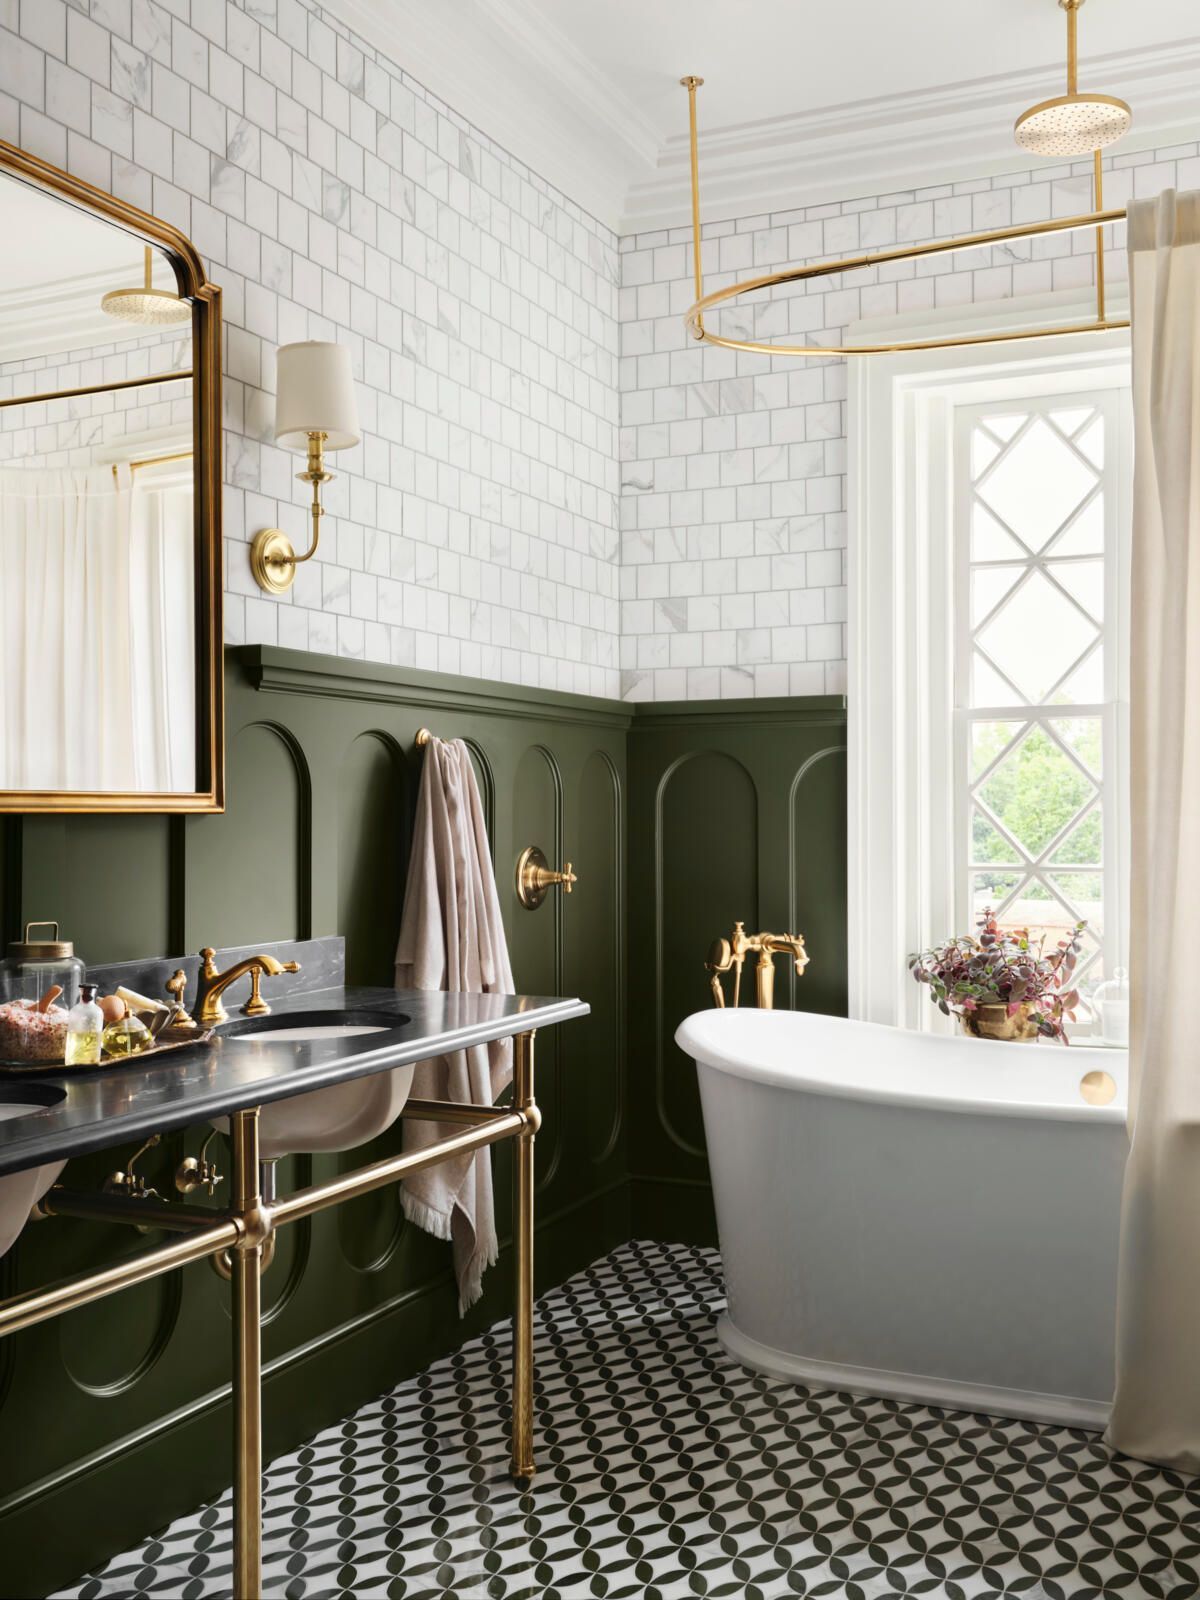 Choosing the Perfect Paint Colors for
Your Bathroom